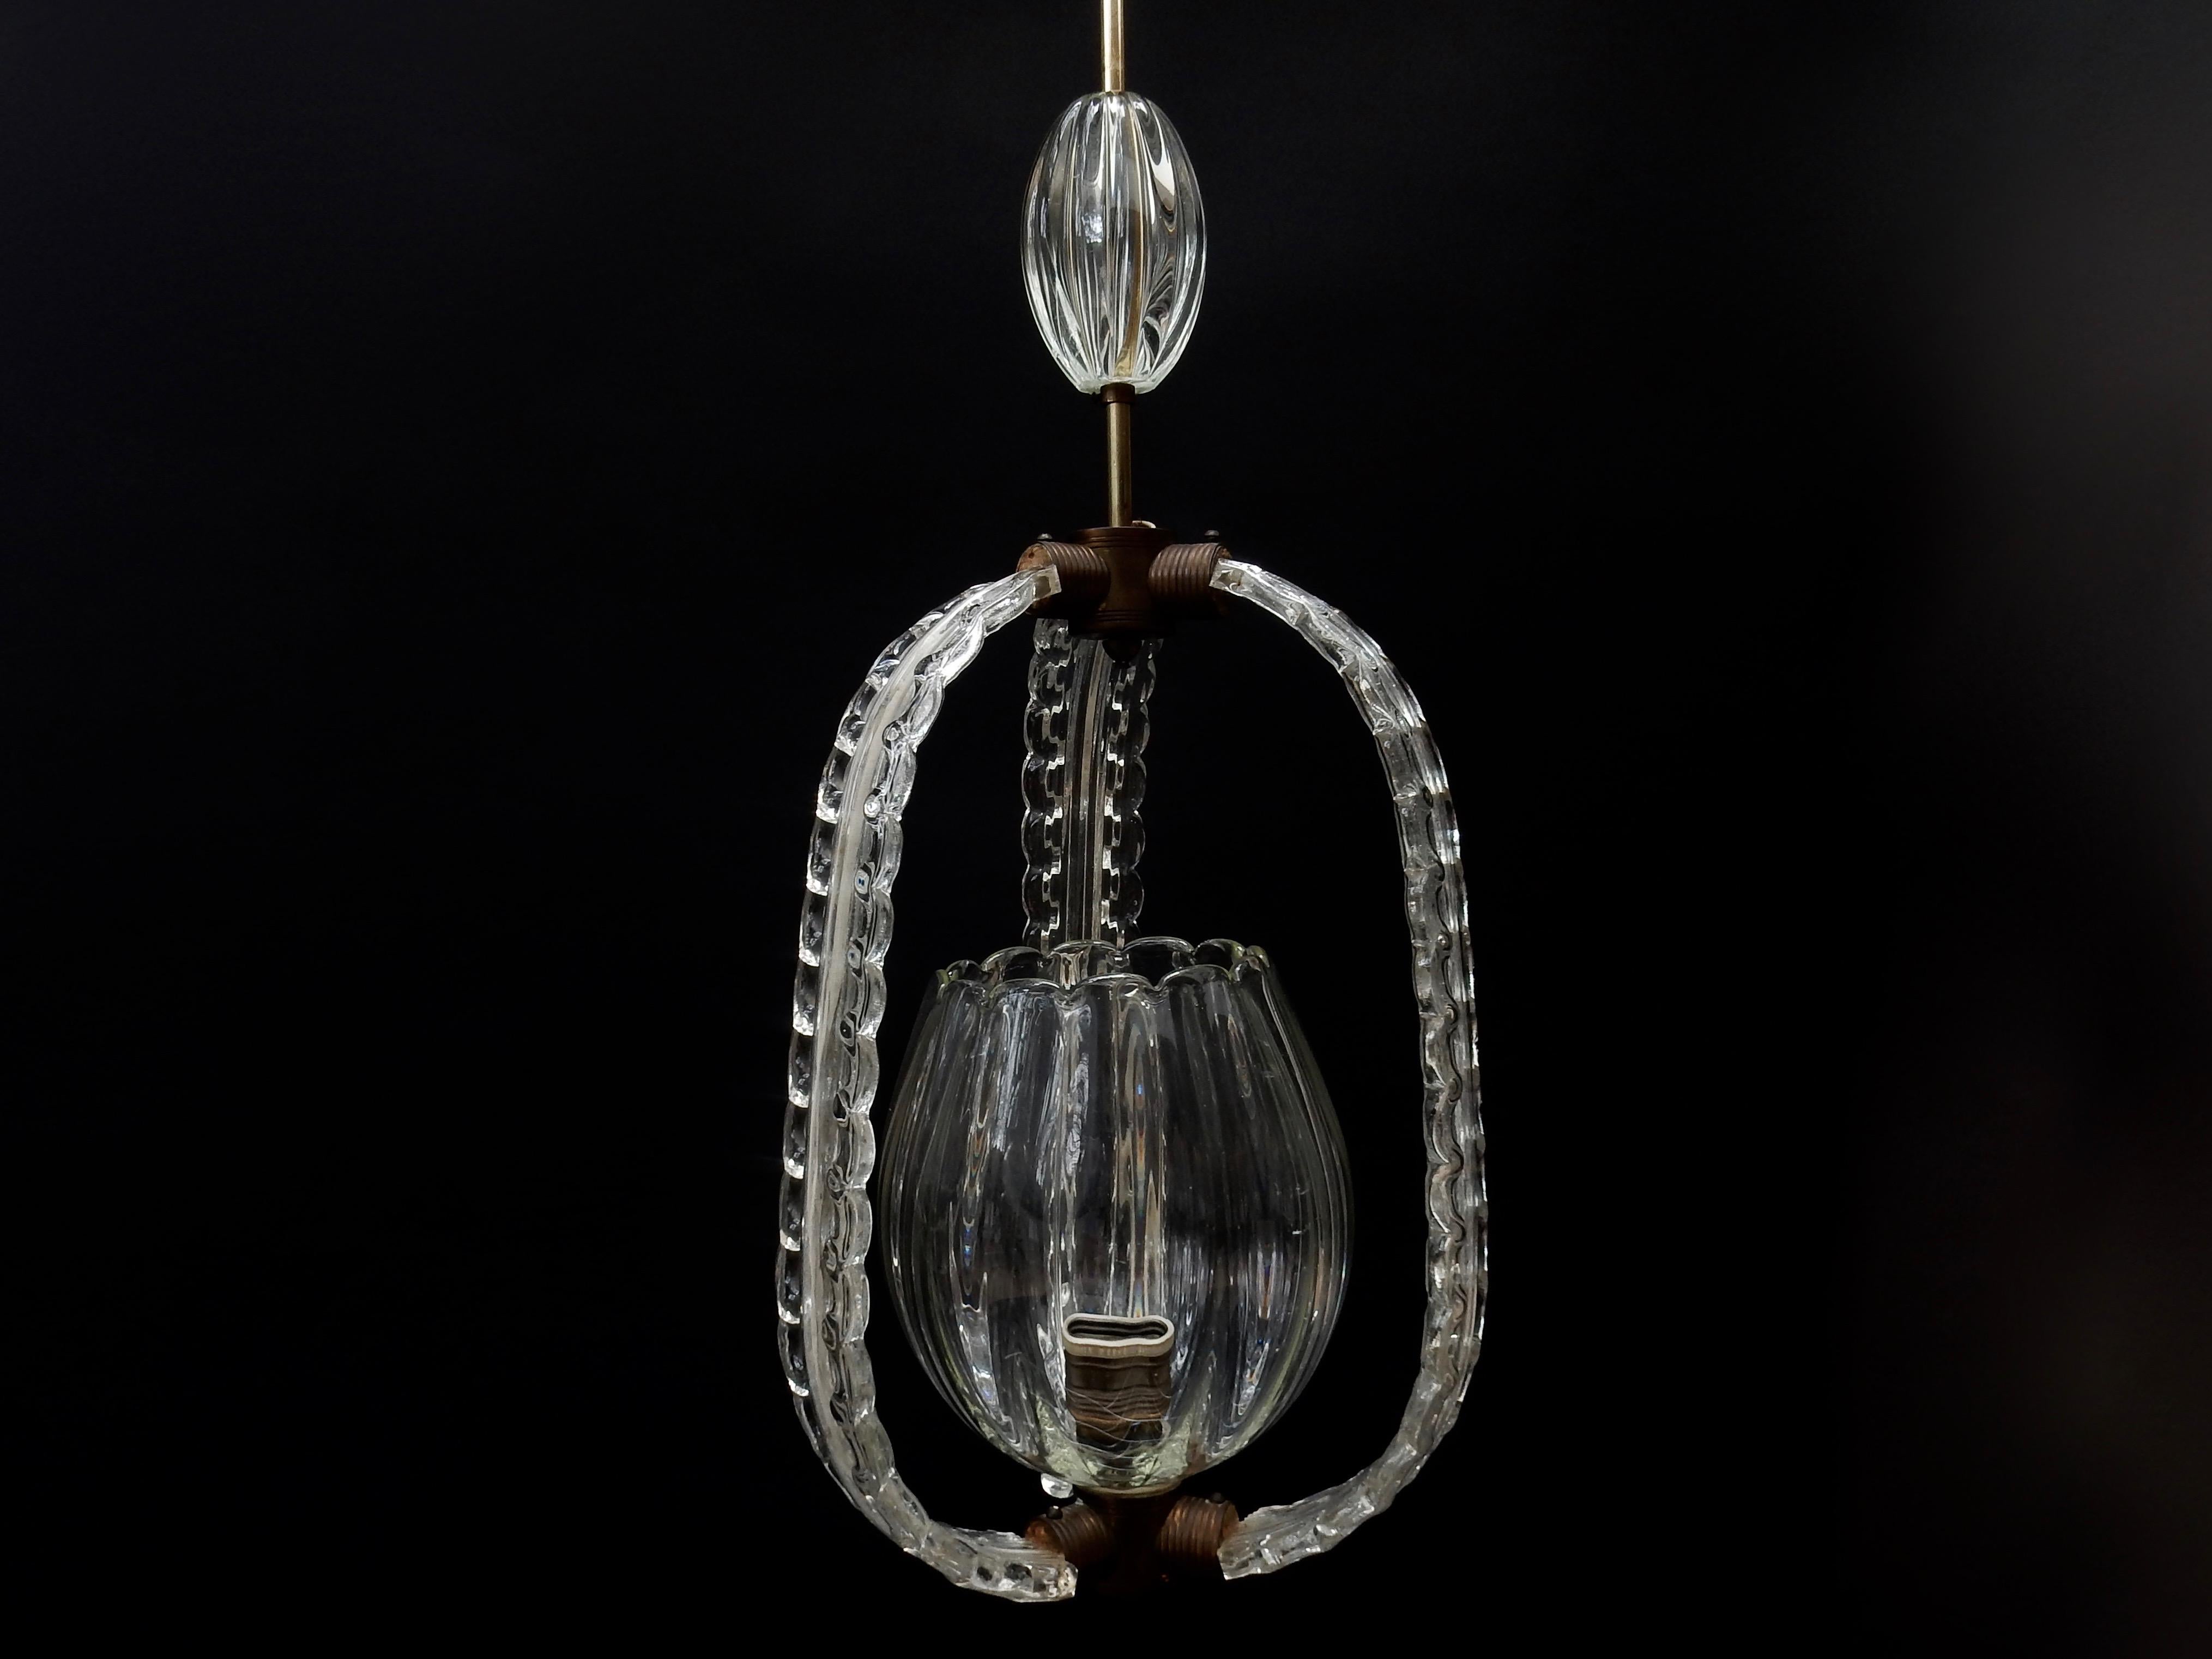 Italian 1940s Murano glass hanging lantern with central glass bowl.